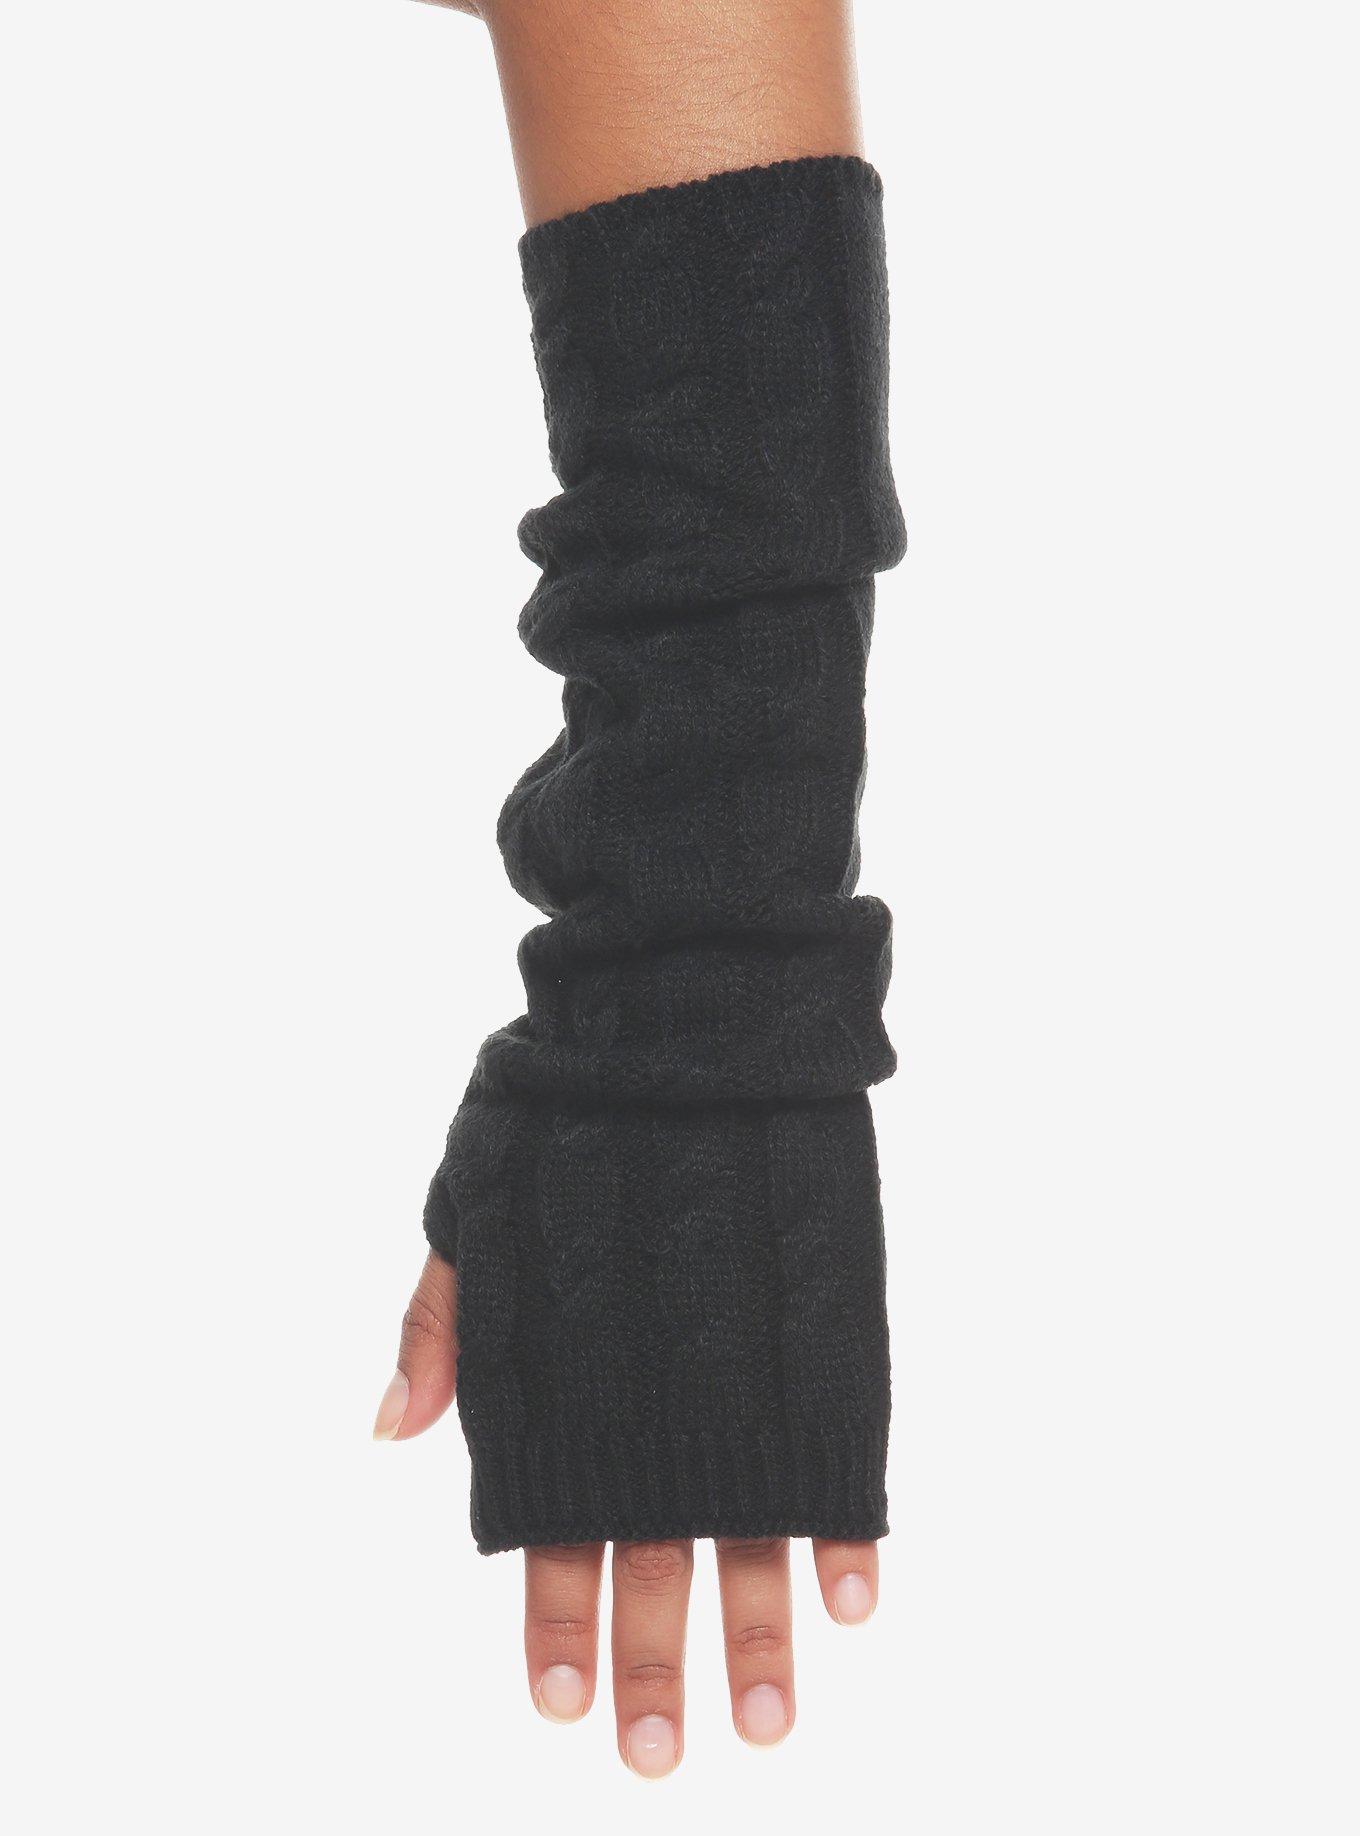 Black Cable Knit Arm Warmers